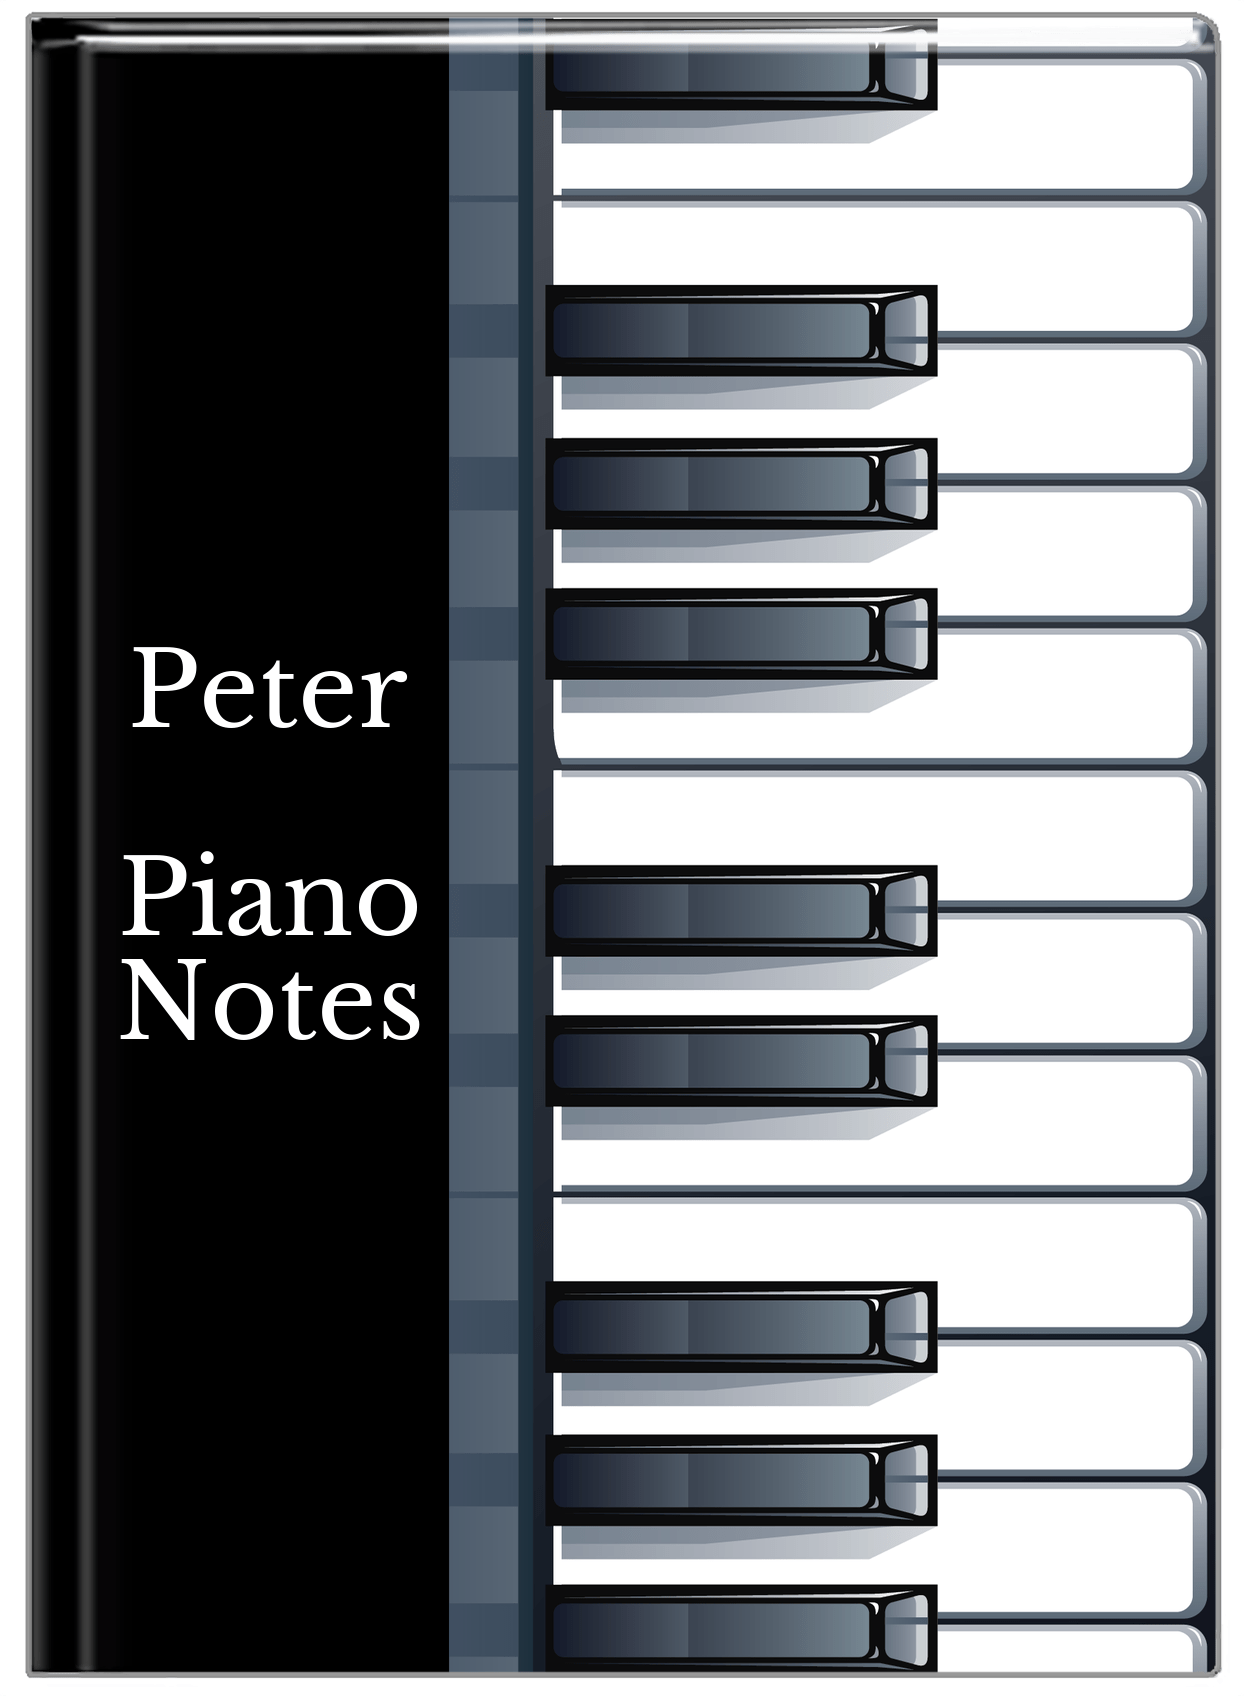 Personalized Piano Keys Journal - Black Background II - Front View